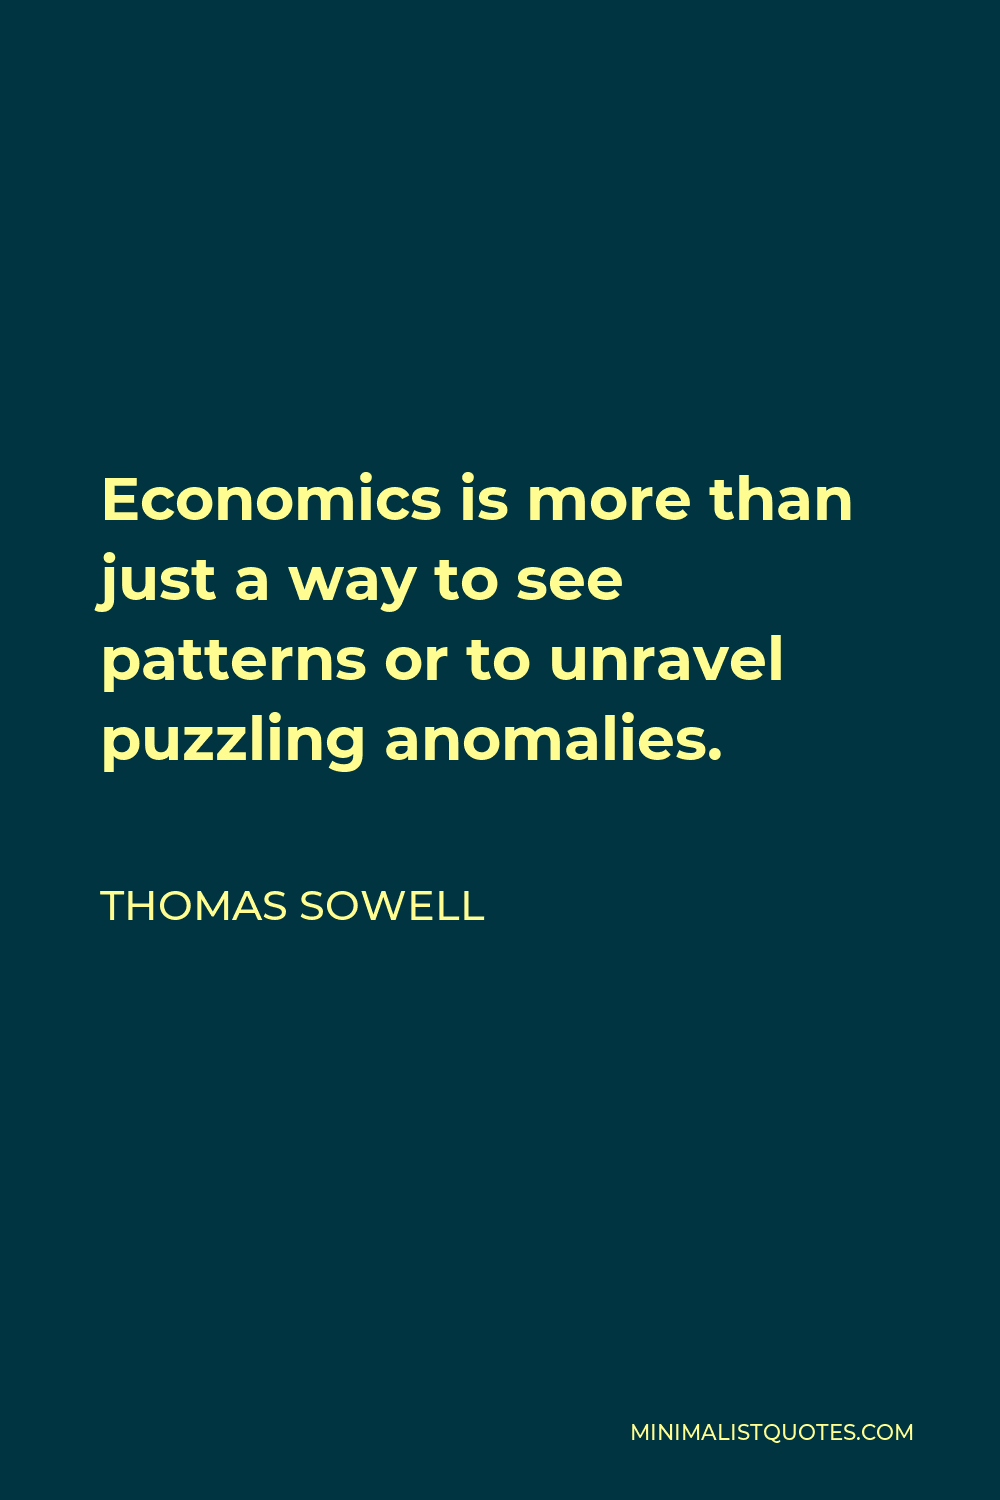 Thomas Sowell Quote - Economics is more than just a way to see patterns or to unravel puzzling anomalies.